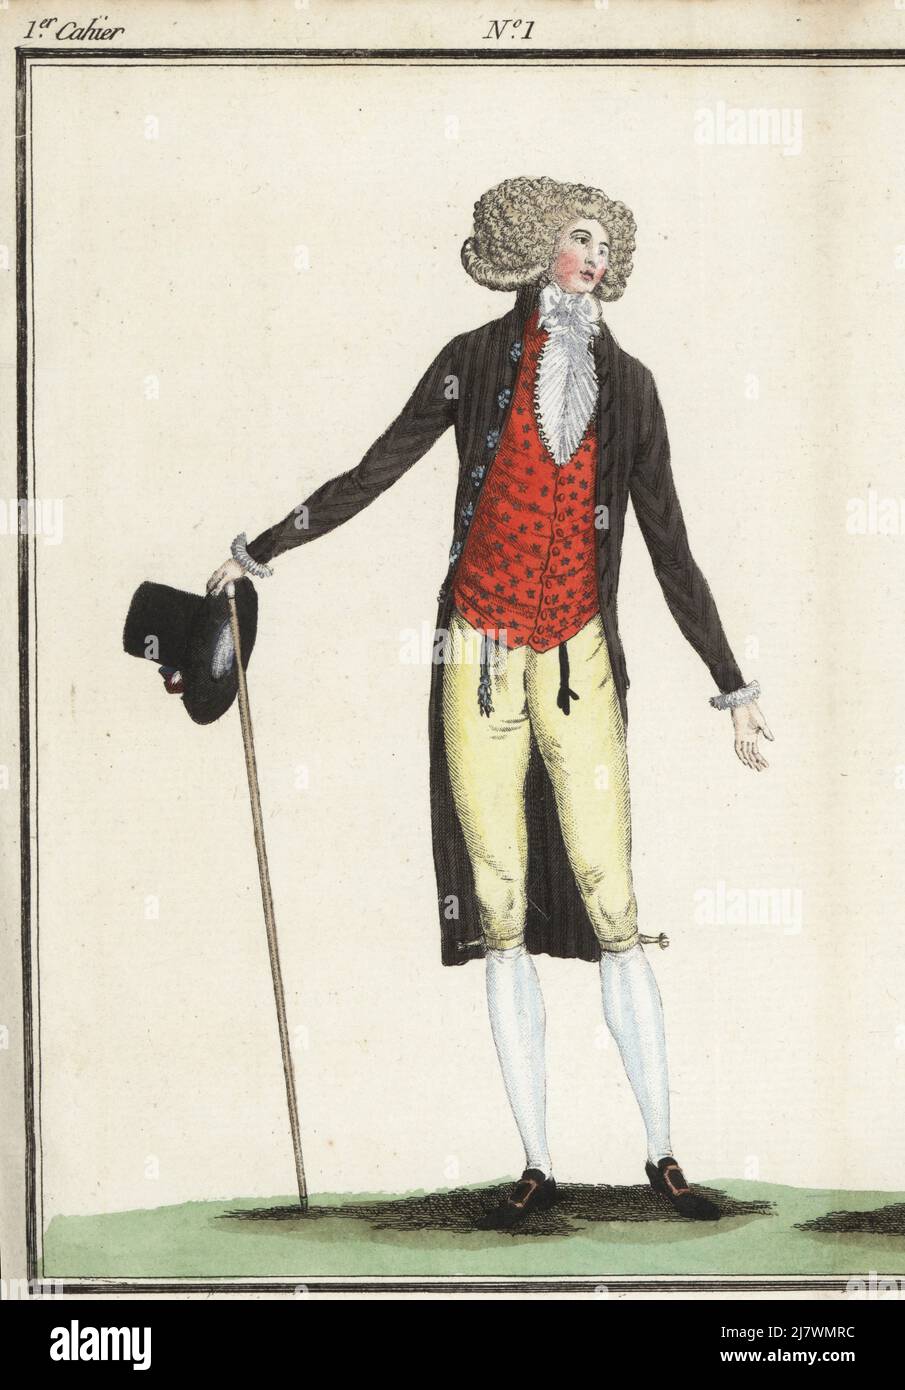 Fashionable man in black coat a la Revolution, cravatte over a large jabot.  cashmere waistcoat or gilet, yellow culottes, silk hose, and buckle shoes.  With cane and top hat. Handcoloured copperplate engraving